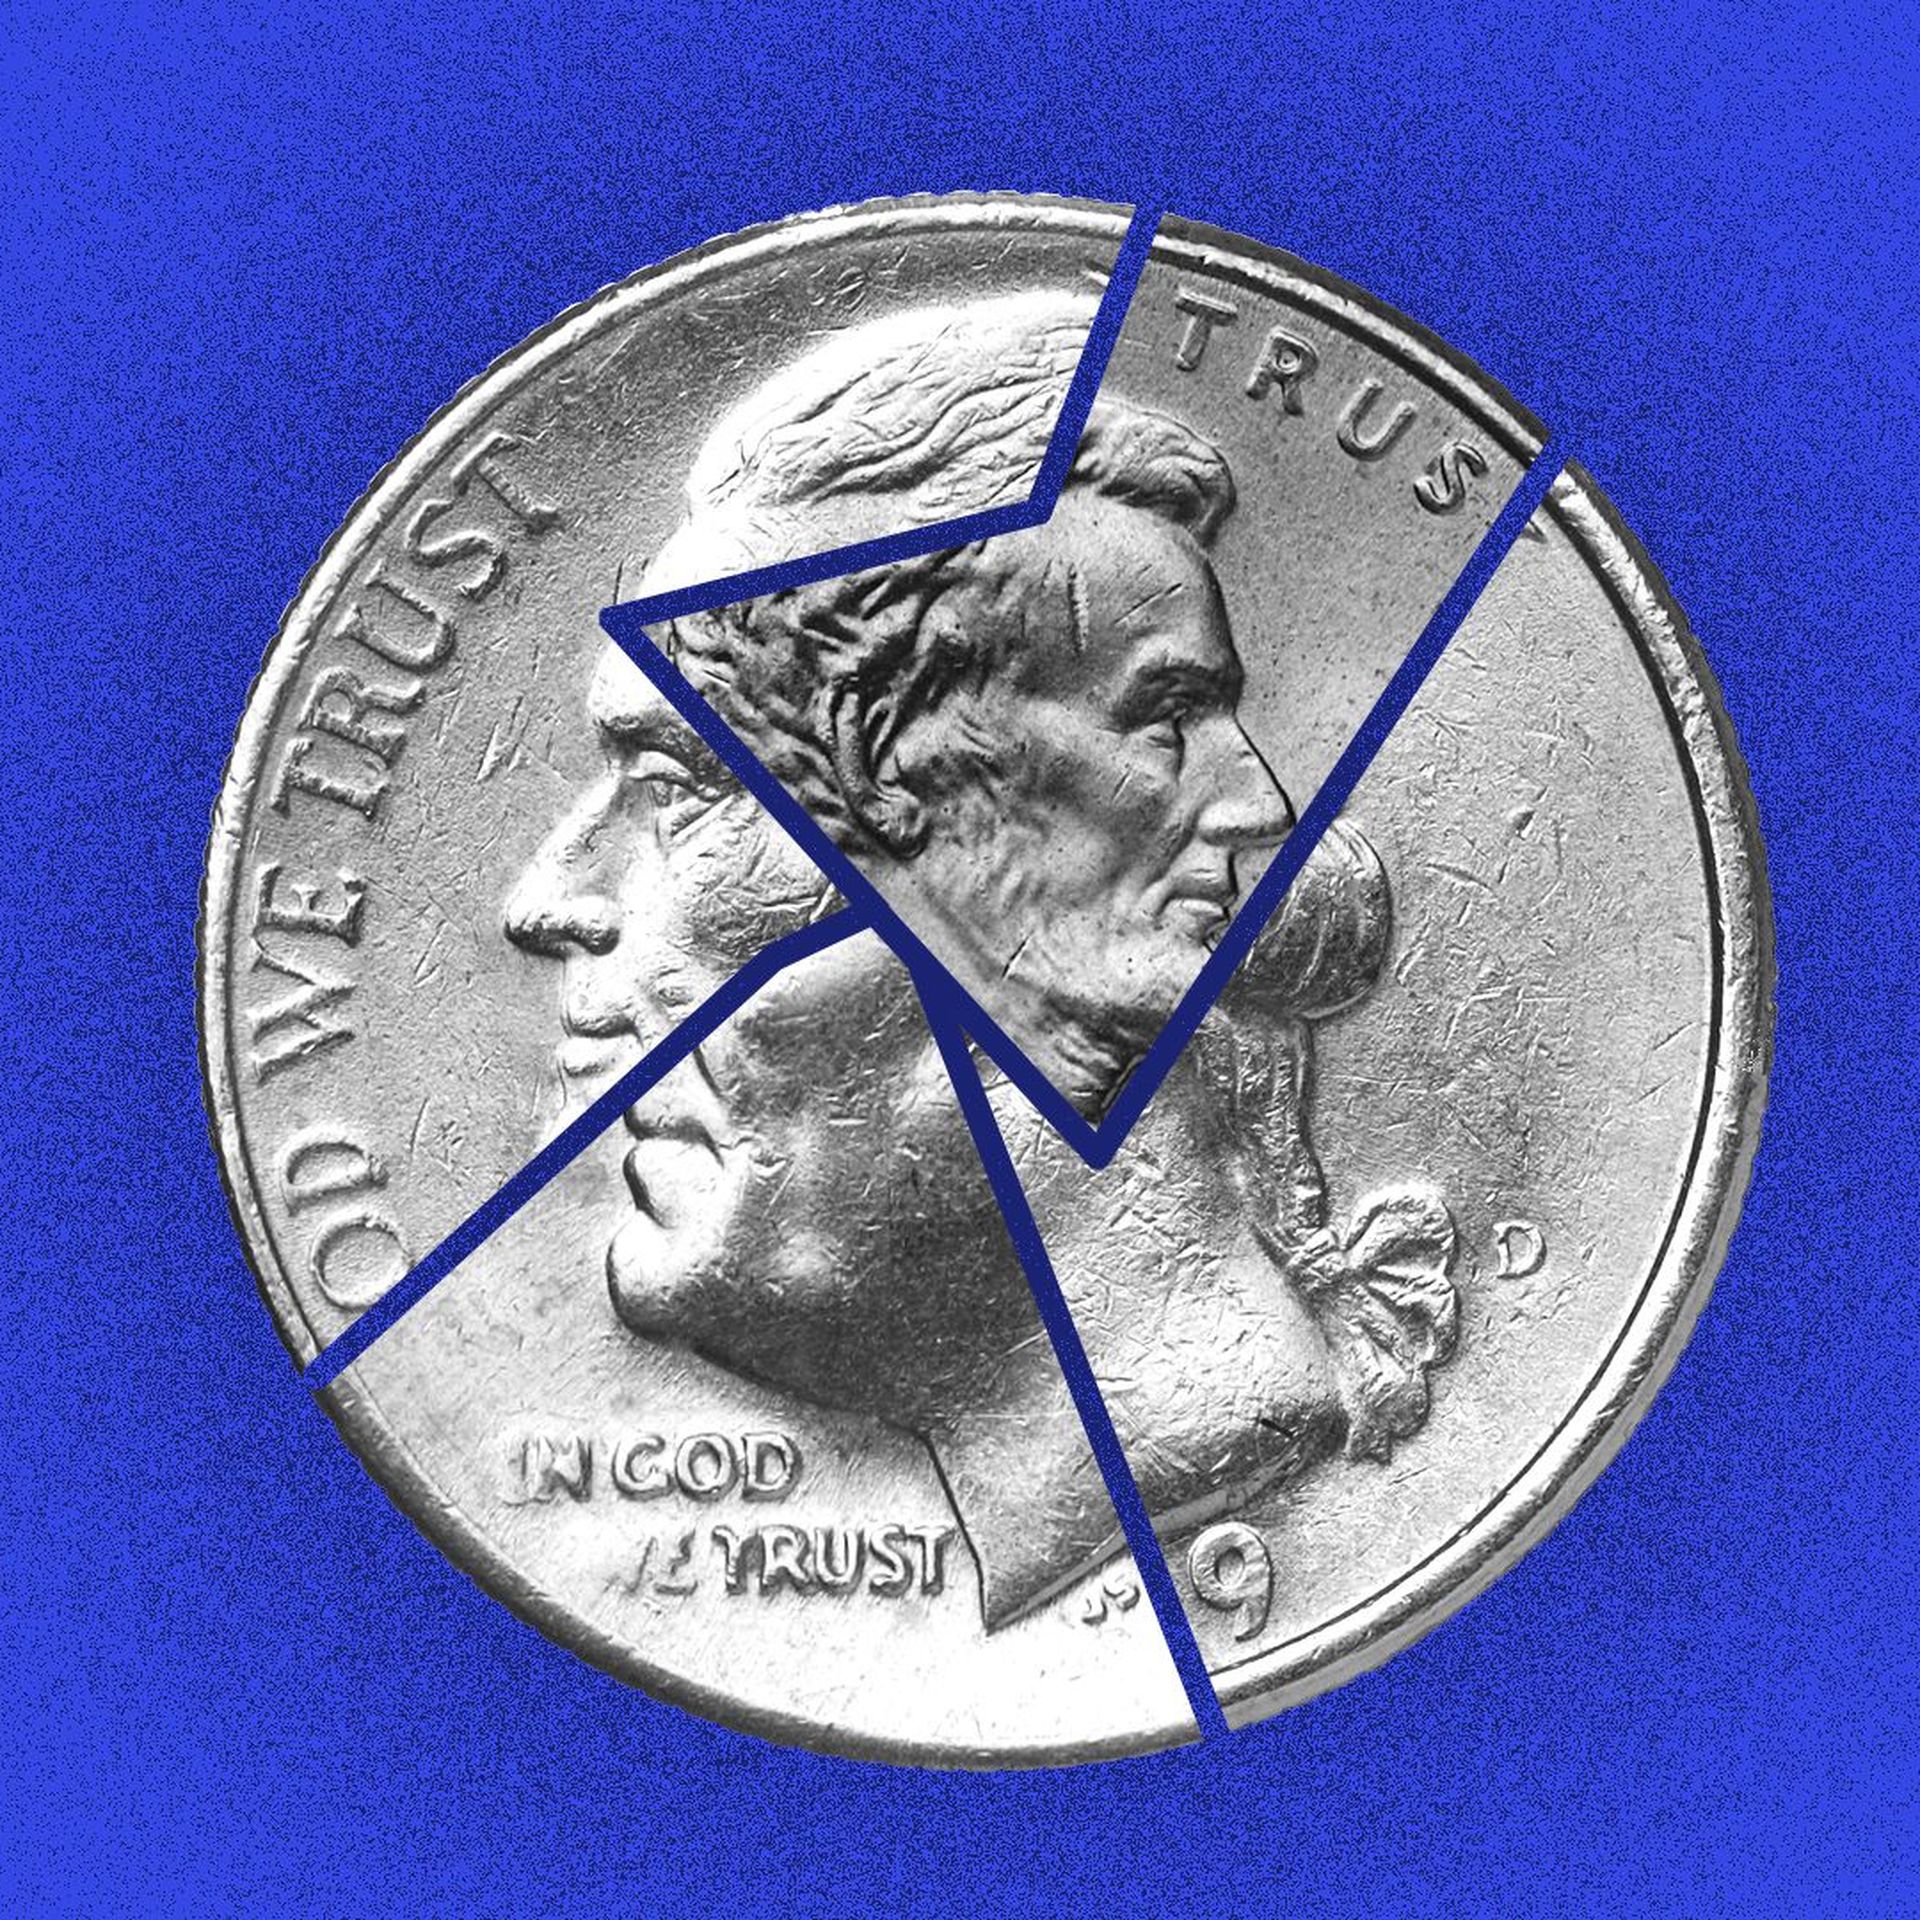 Illustration of a coin made up of different coin denominations. 